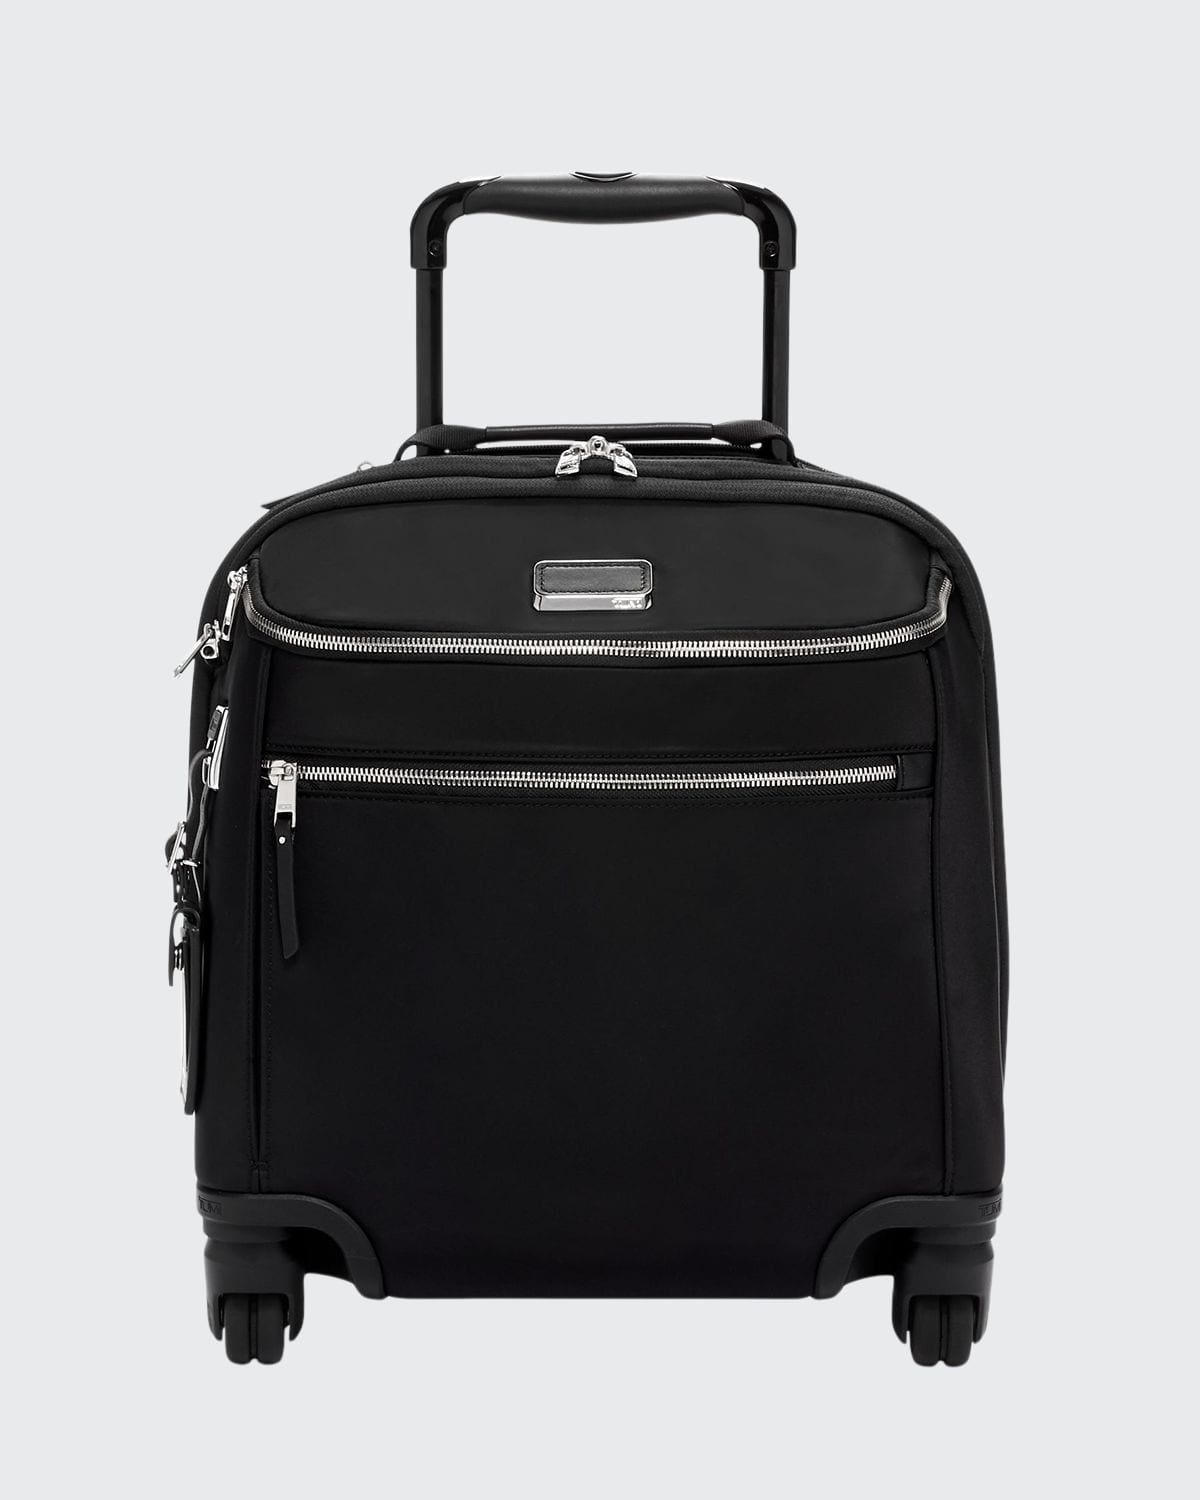 Tumi Oxford Compact Carry-on Luggage, Black/silver